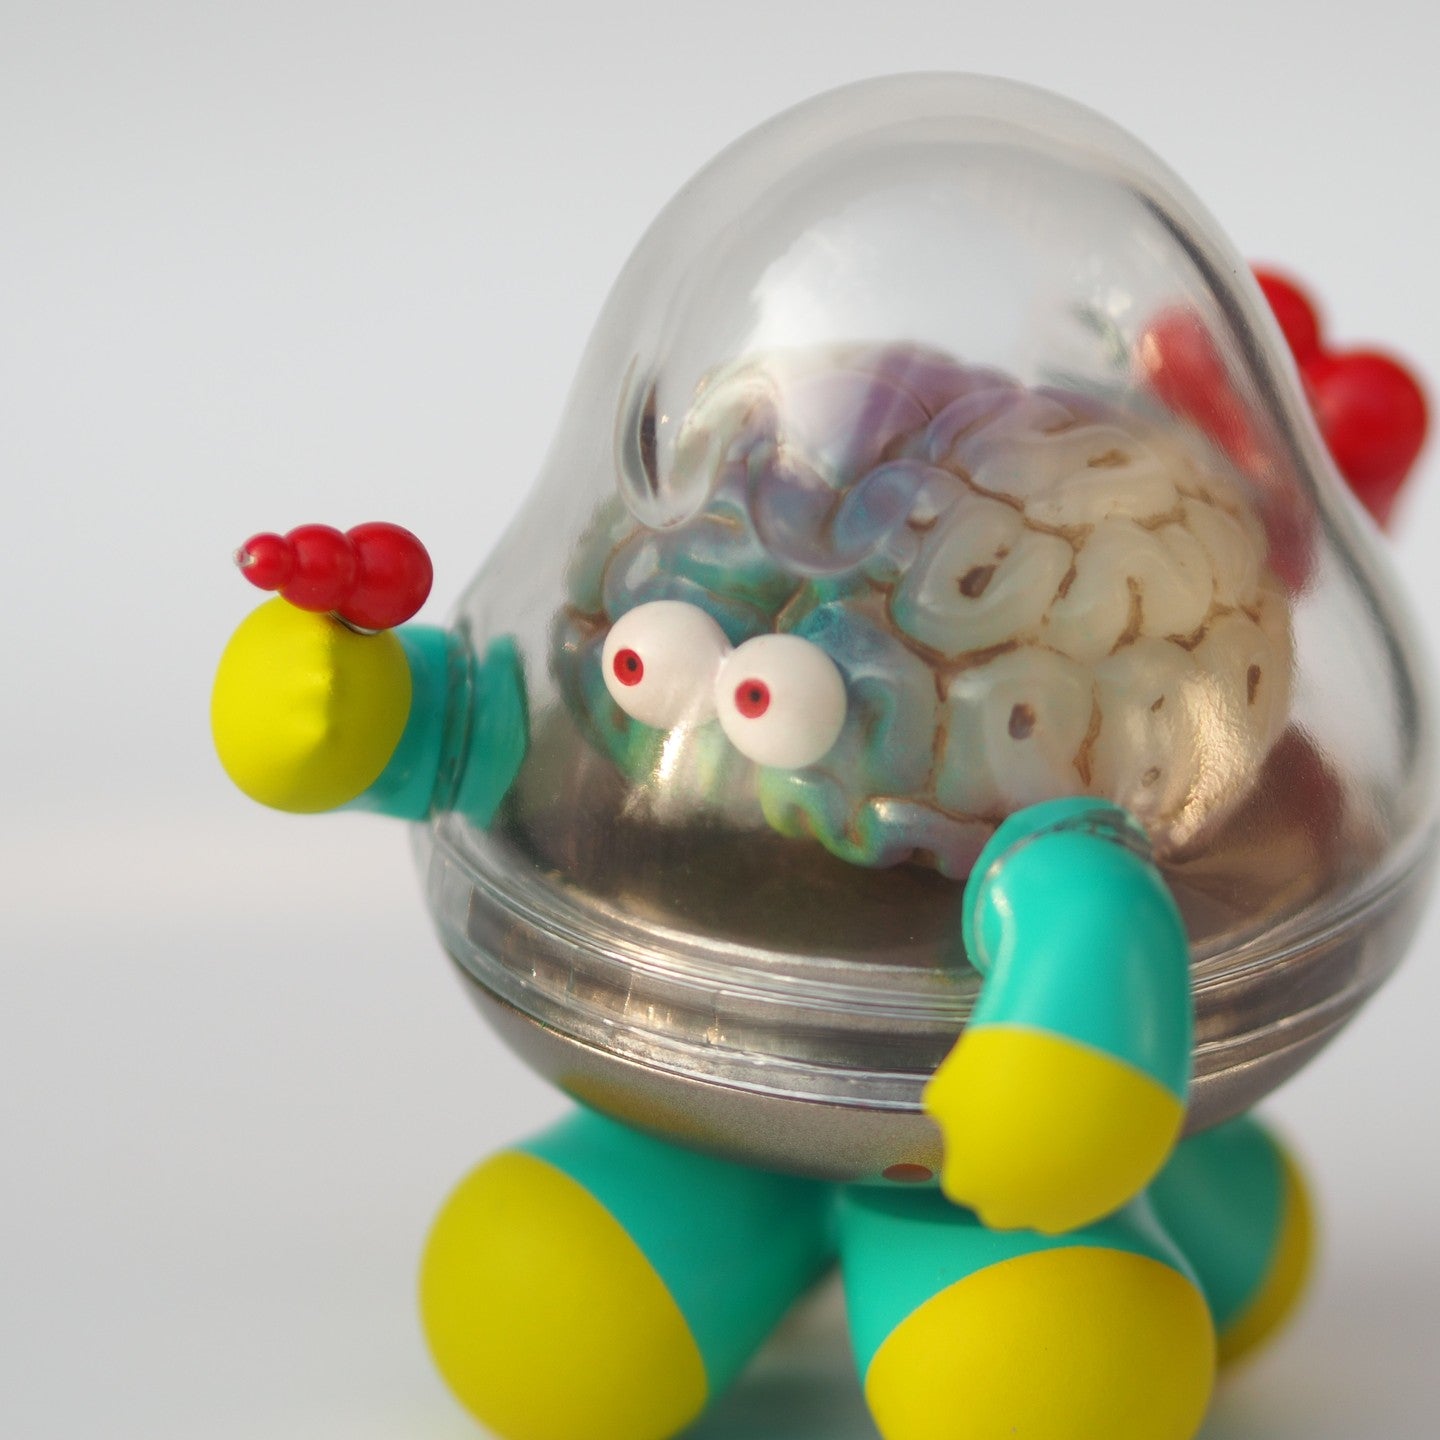 A toy with a brain and arms, Mr.Brain - Brains Attacks, in sofubi/resin, 9 cm tall. Close-ups of eyes, brain, and colorful elements. Preorder - Ships Late May 2024.